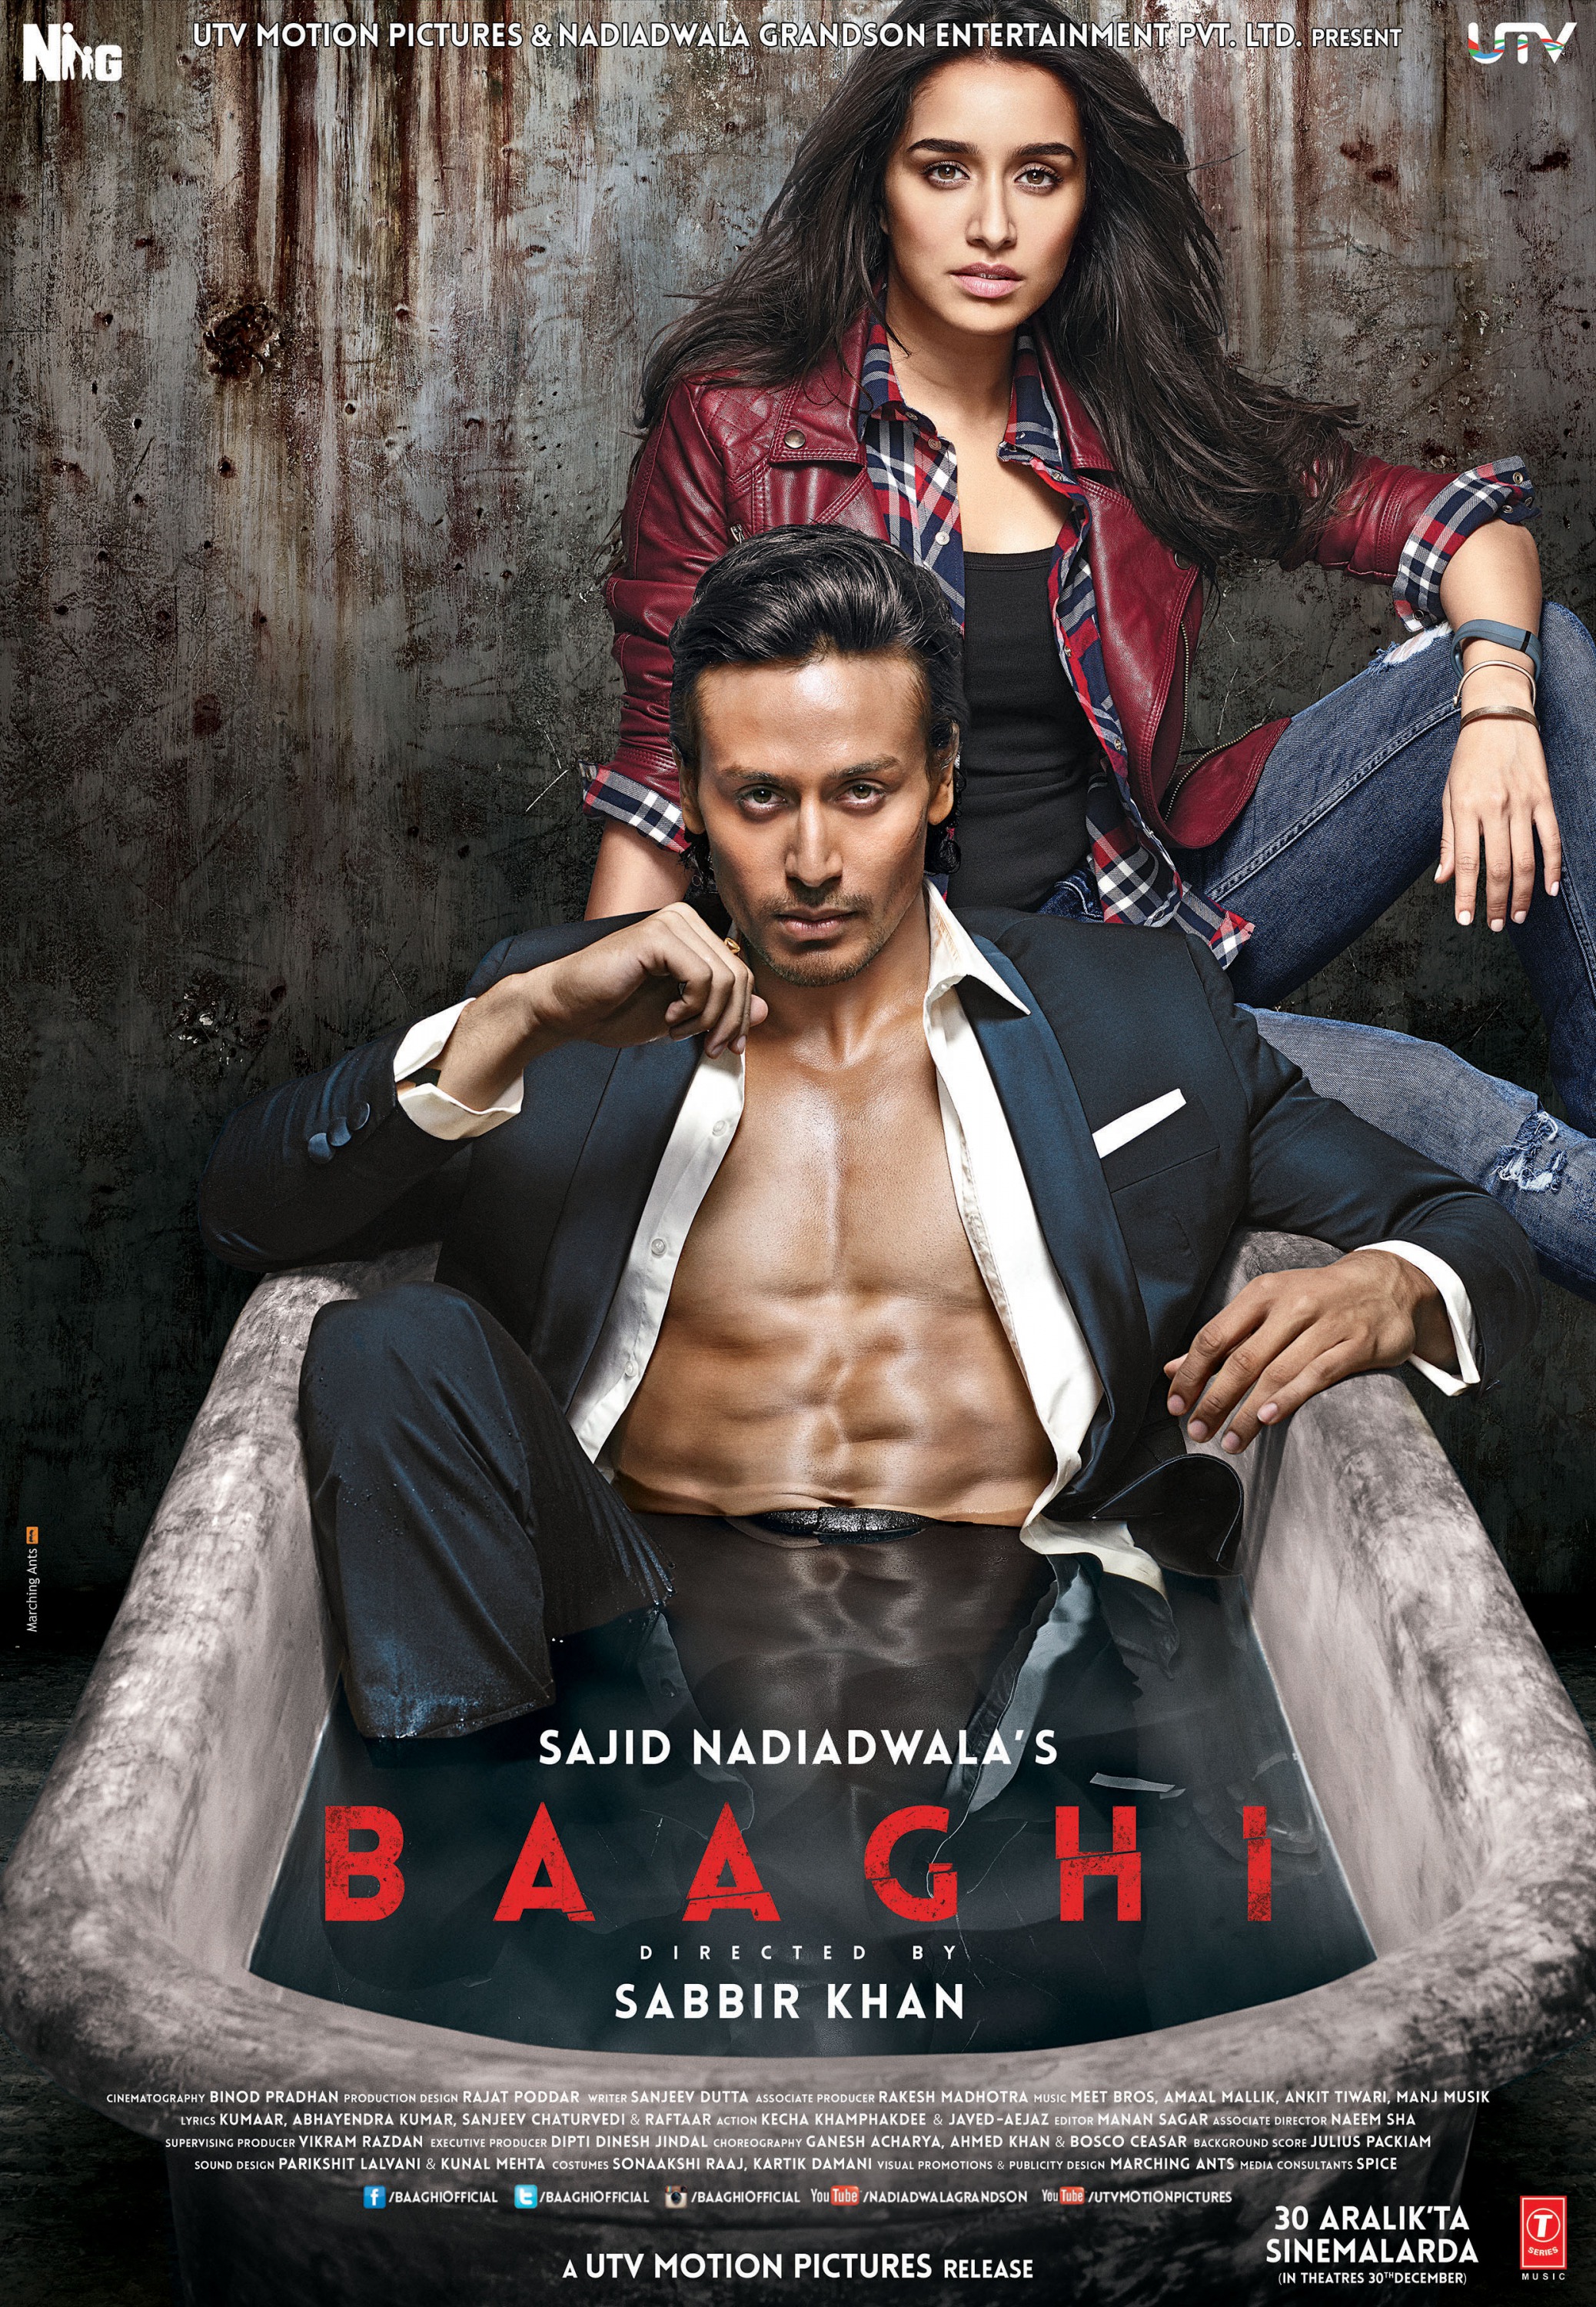 Mega Sized Movie Poster Image for Baaghi (#1 of 7)